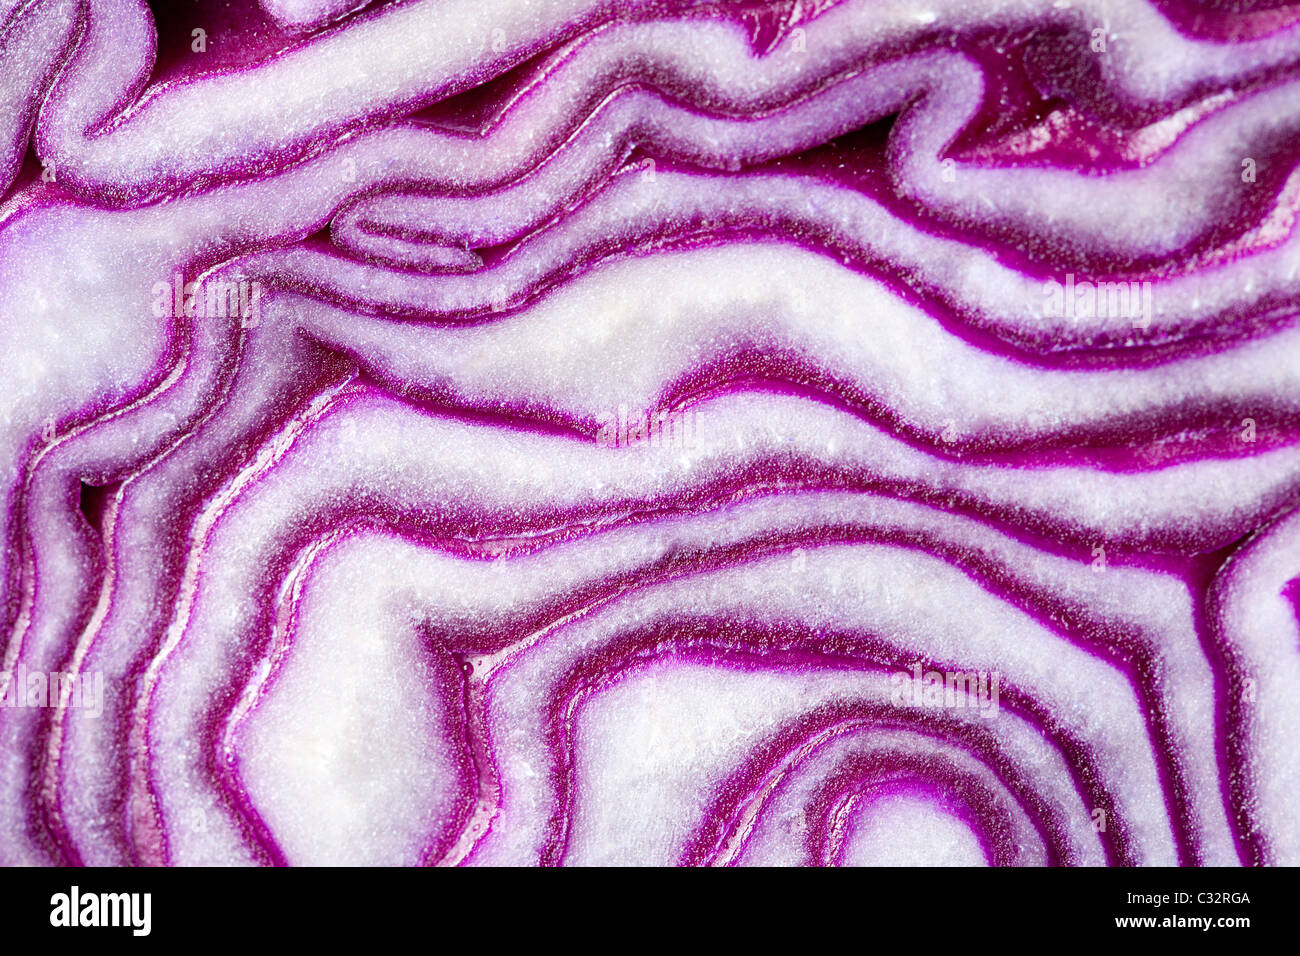 Sliced red cabbage, close up Stock Photo